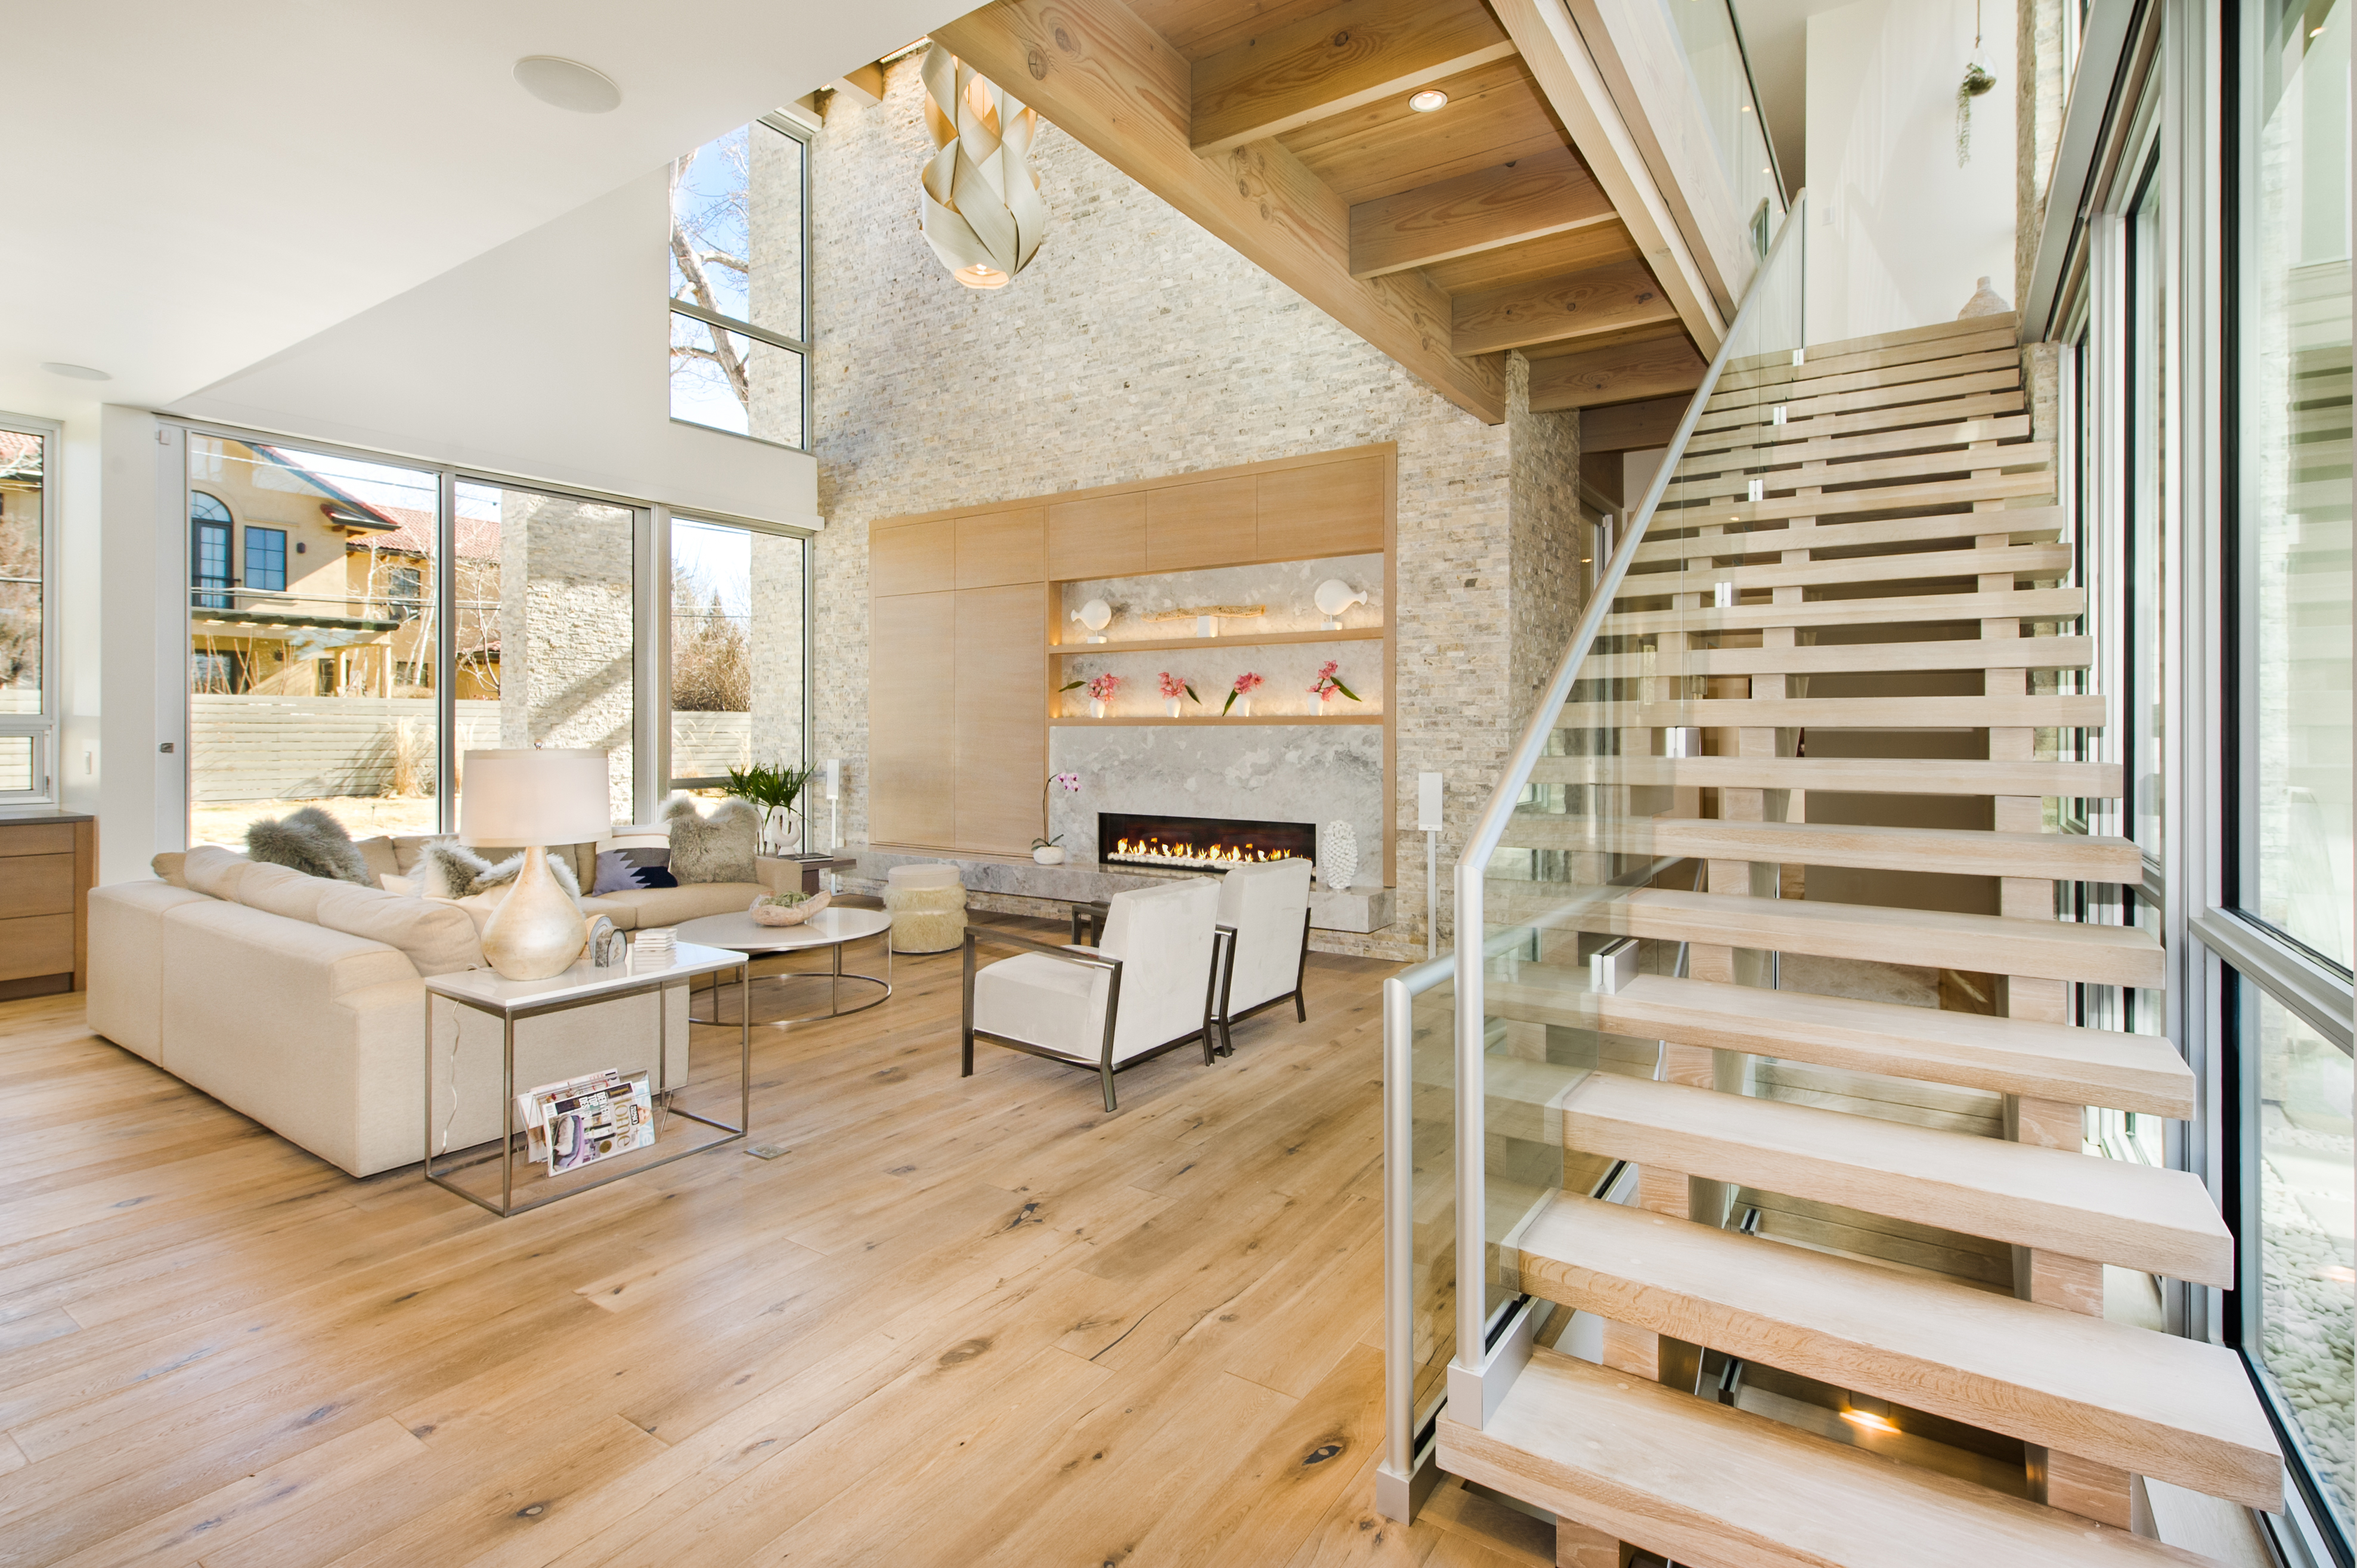 110 S. Cherry Street, Denver. Chic California-contemporary residence designed by homeowner and seller, Karen Hutchinson of Hutchinson Design. Listed for sale by LIV Sotheby’s International Realty for $5,300,000.